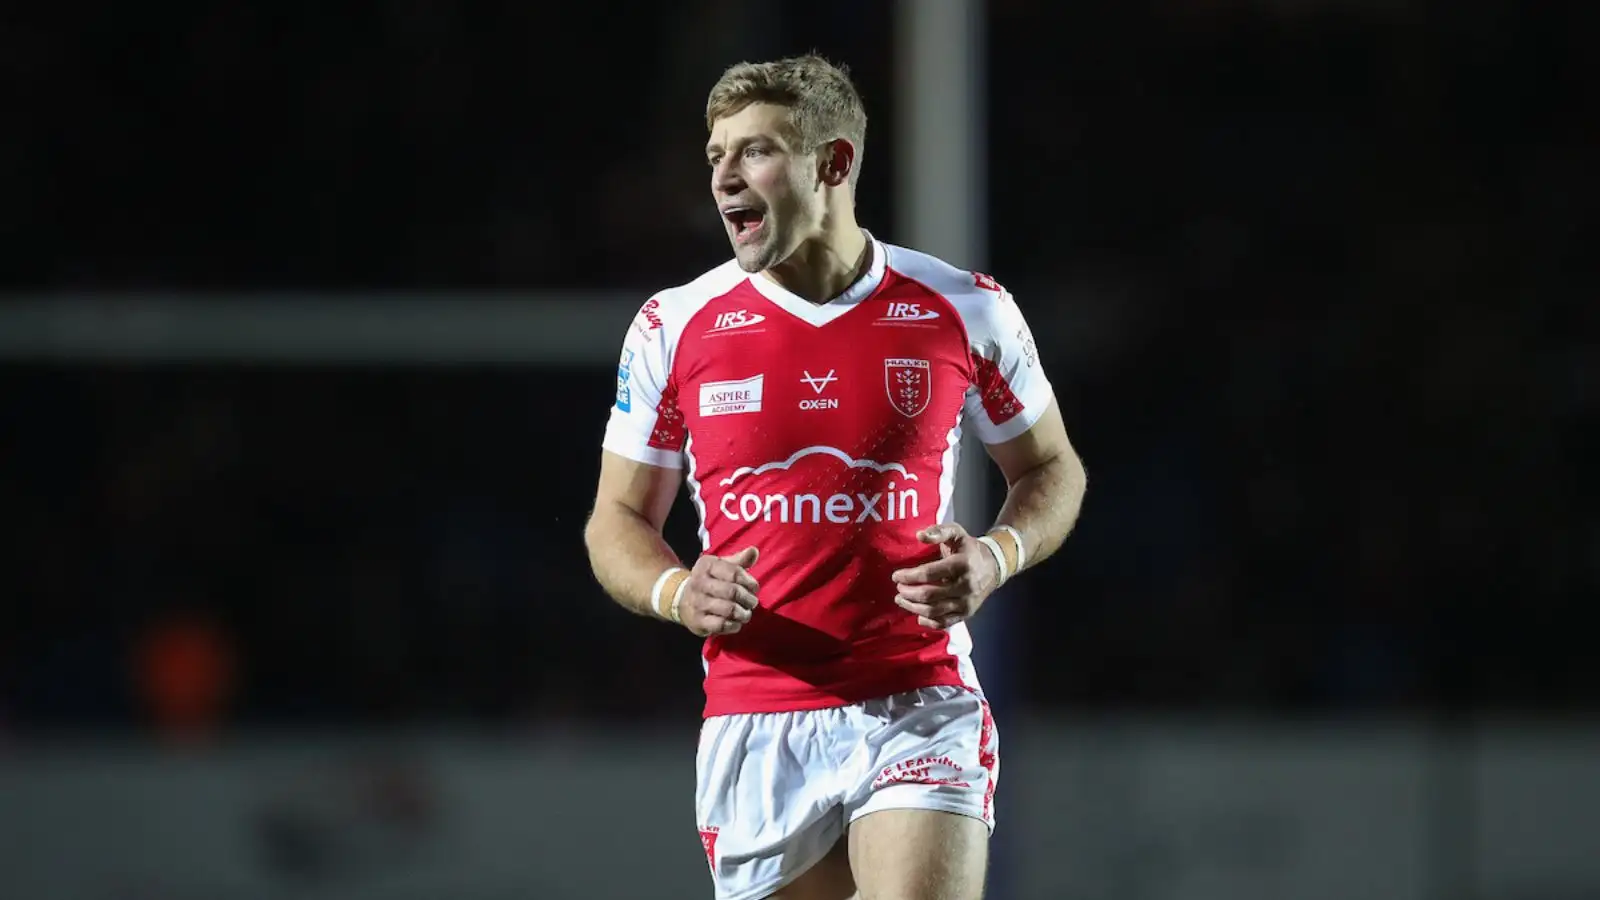 Hull KR’s Jimmy Keinhorst to feature in the Championship this weekend